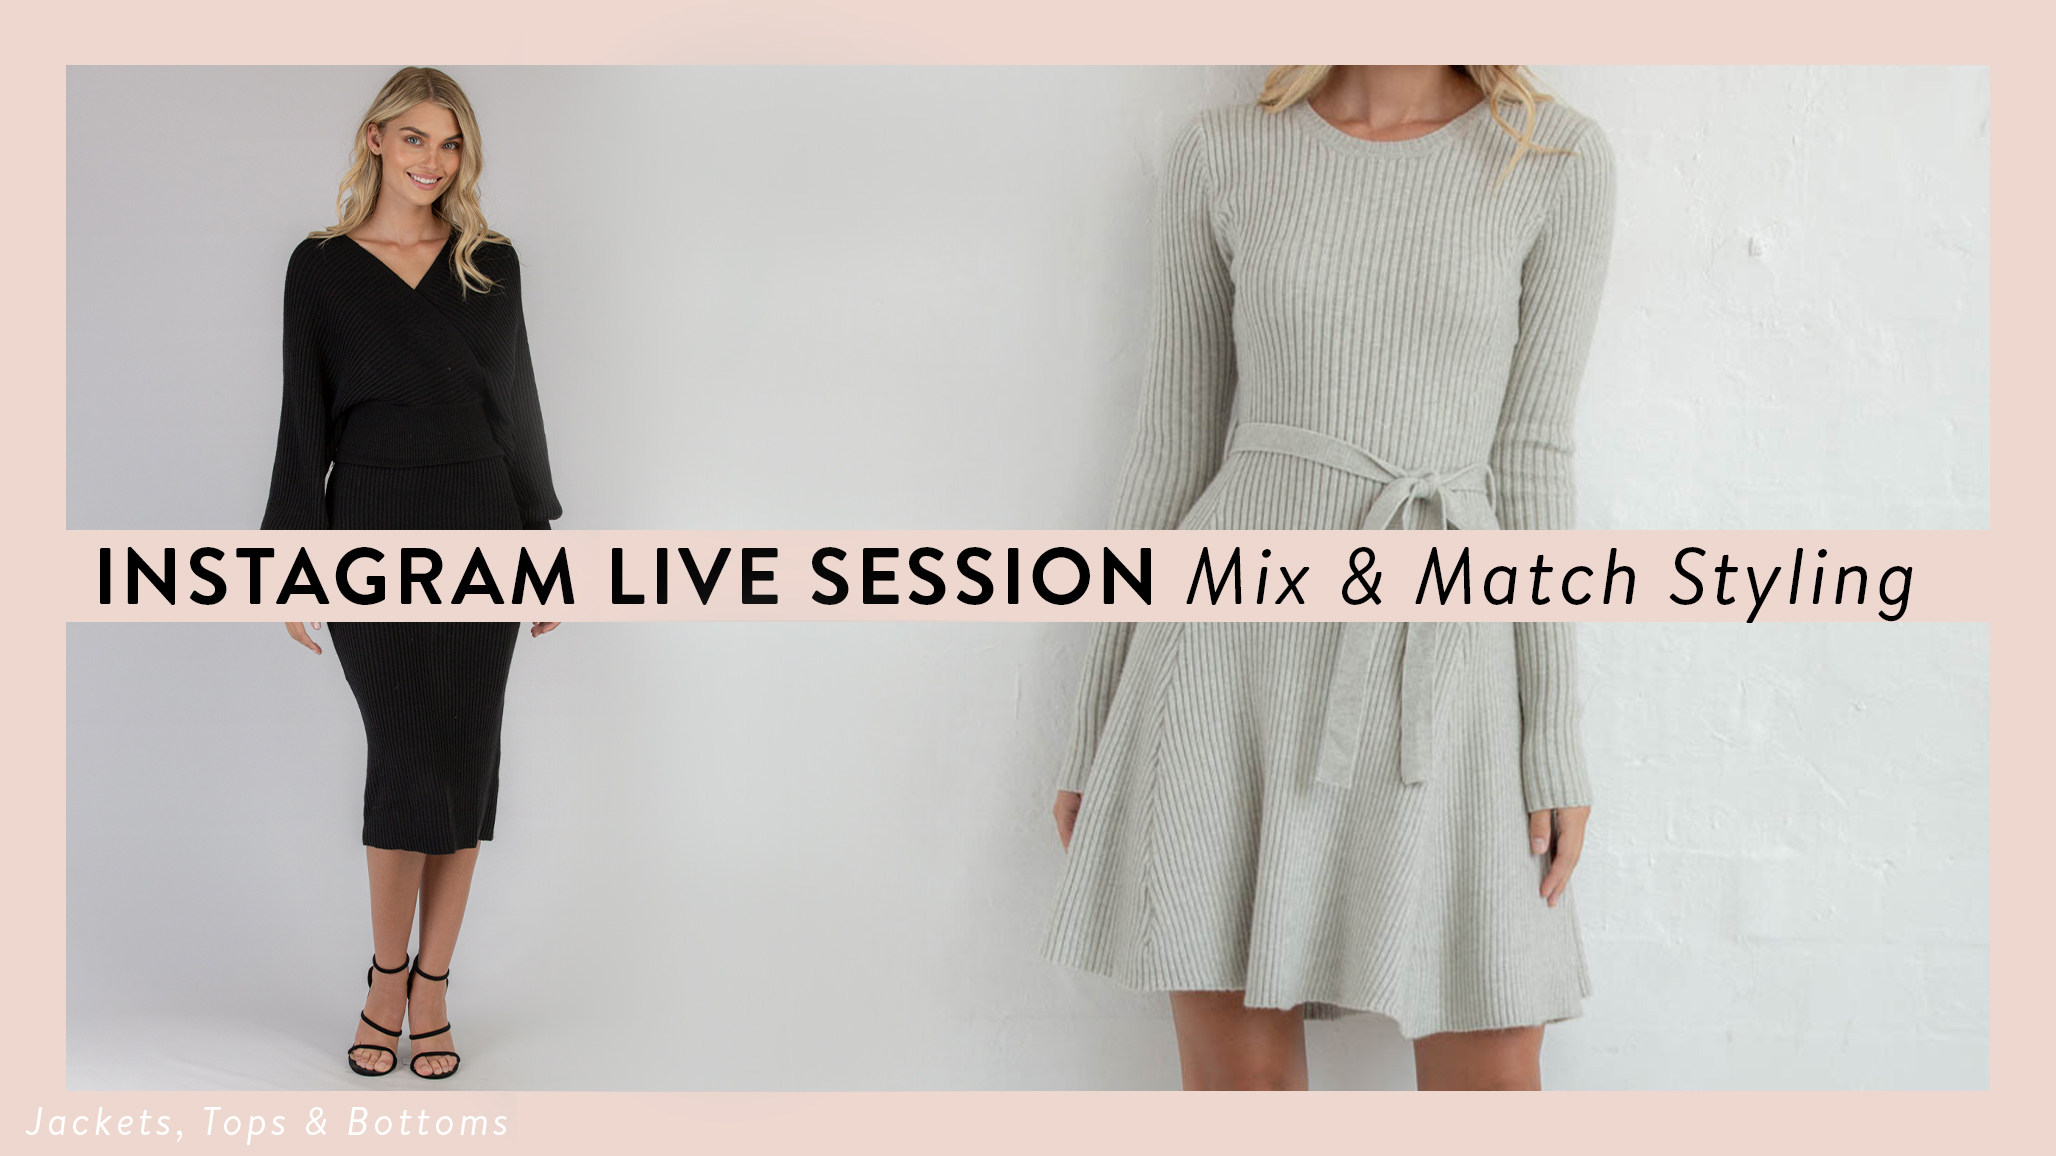 INSTAGRAM LIVE SESSION: MIX & MATCH STYLING